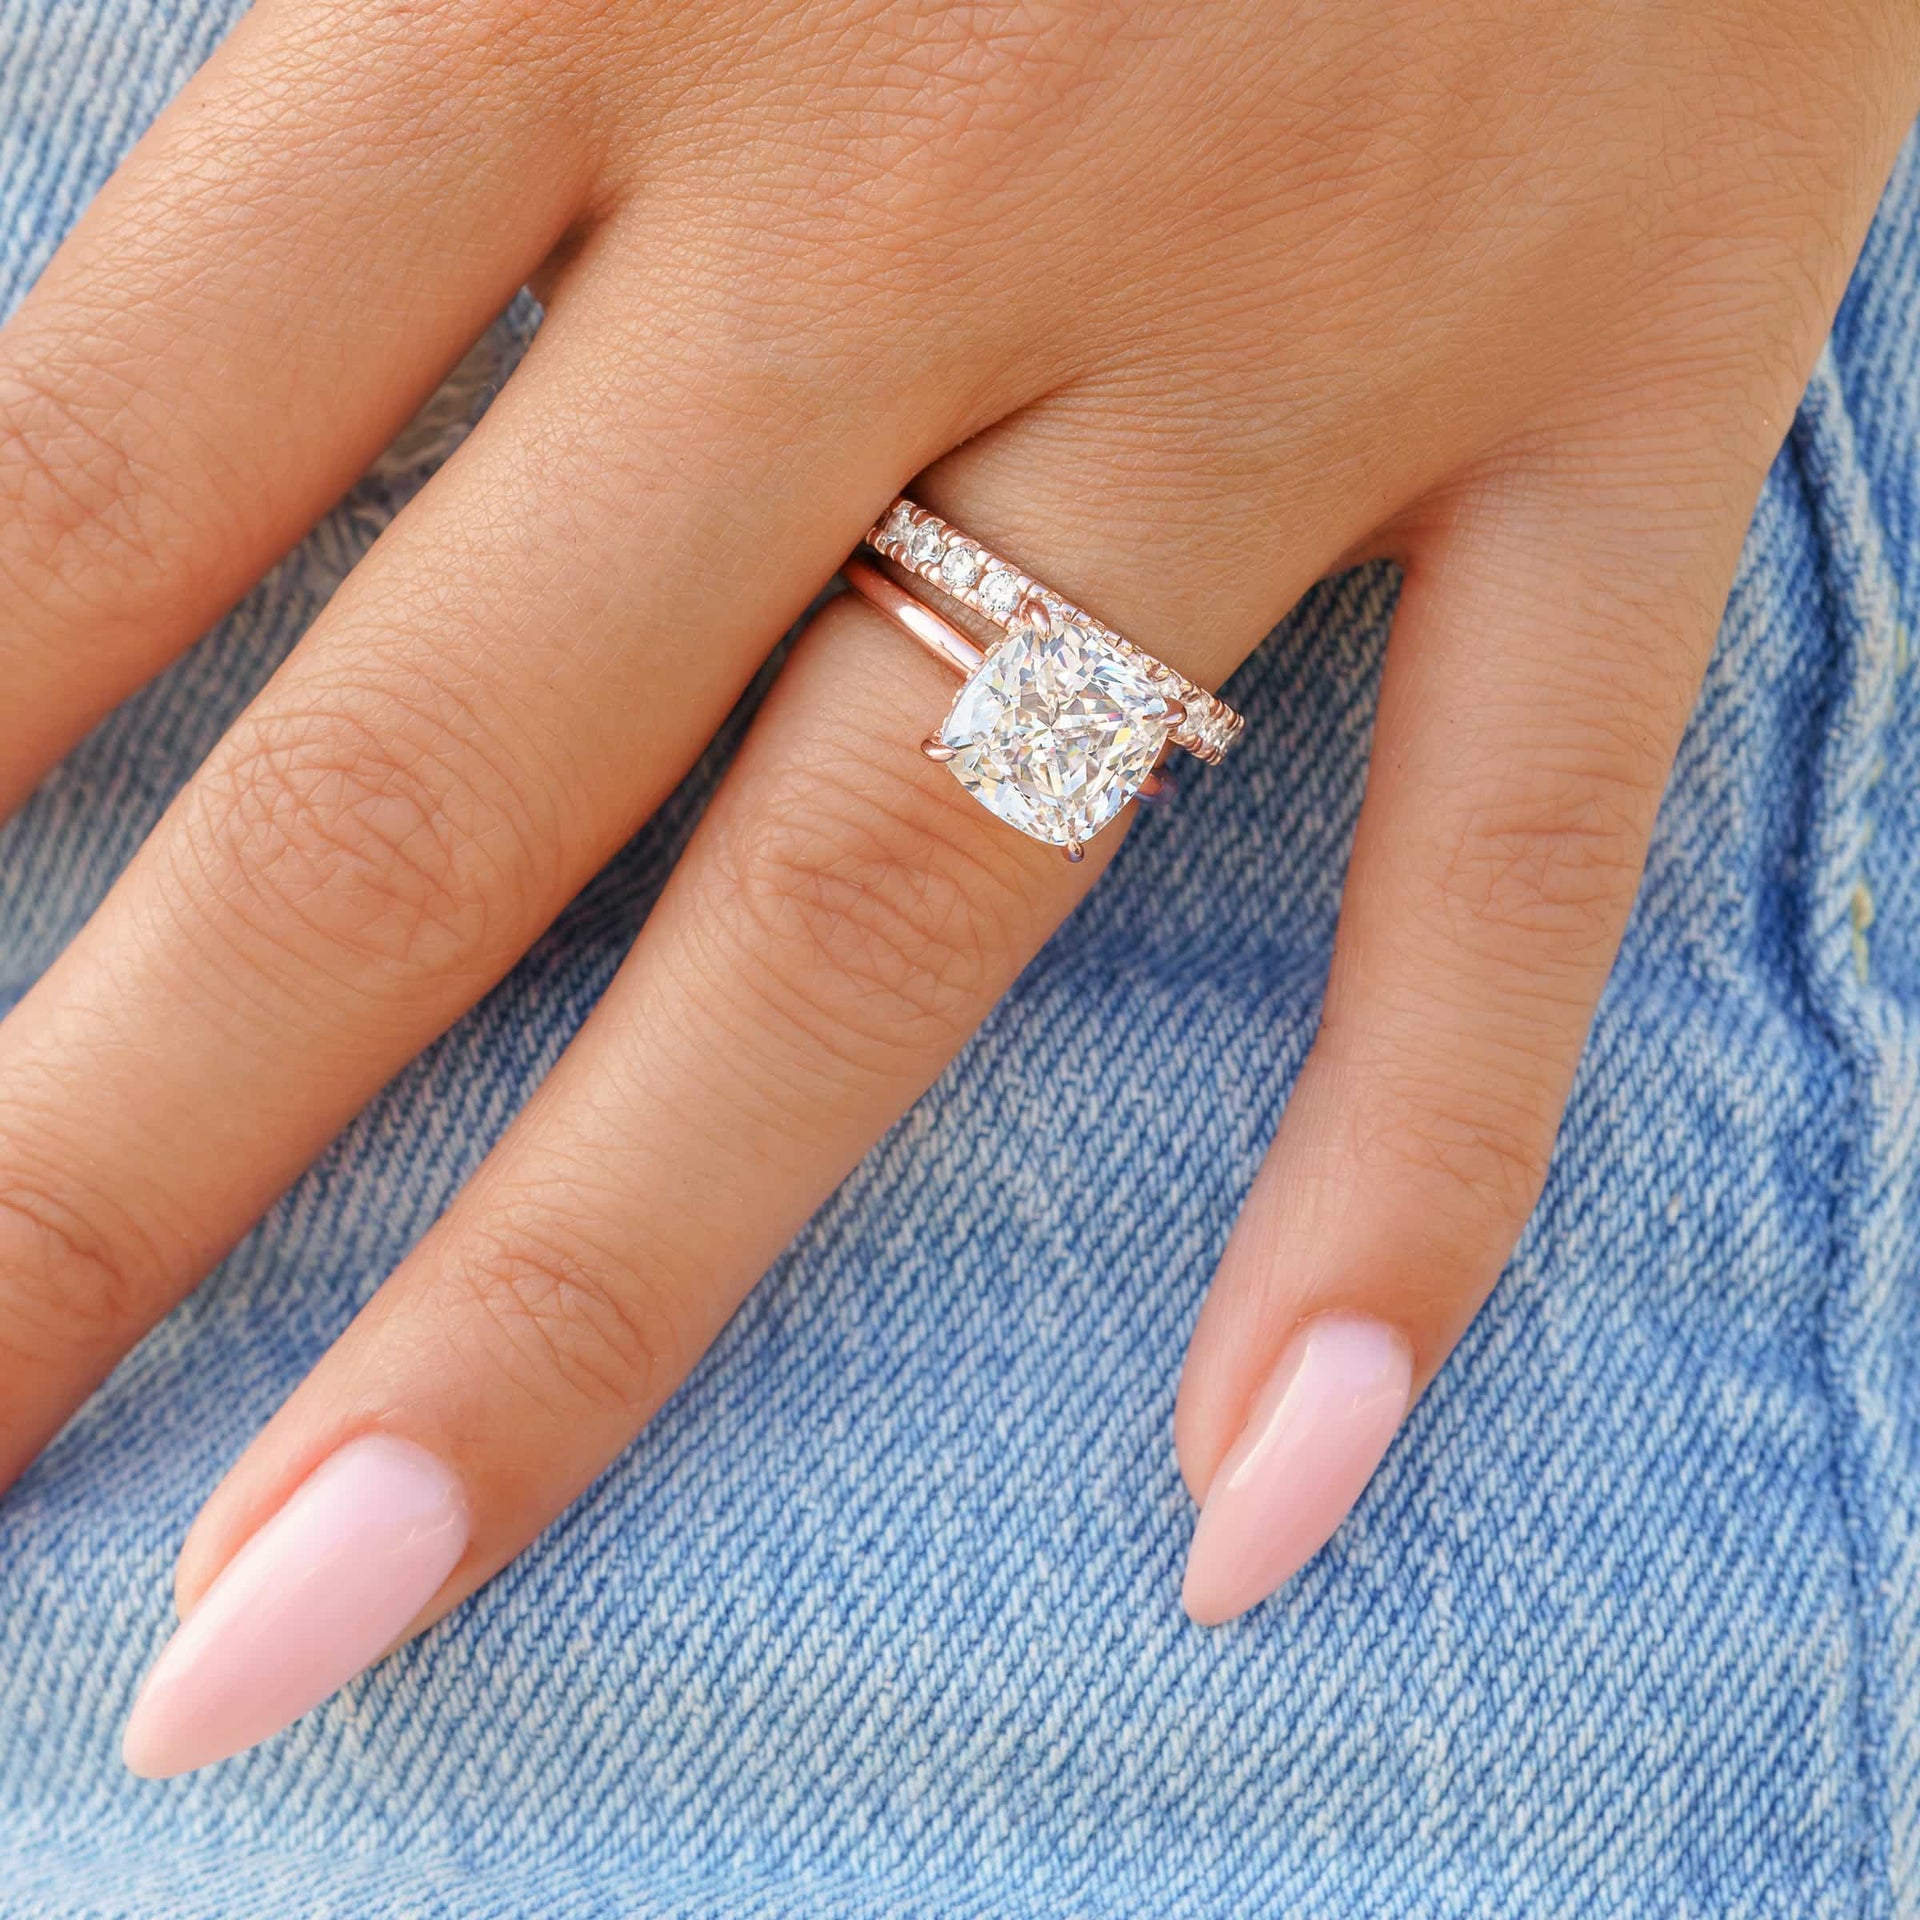 woman wearing rose gold wedding band with cushion cut engagement ring